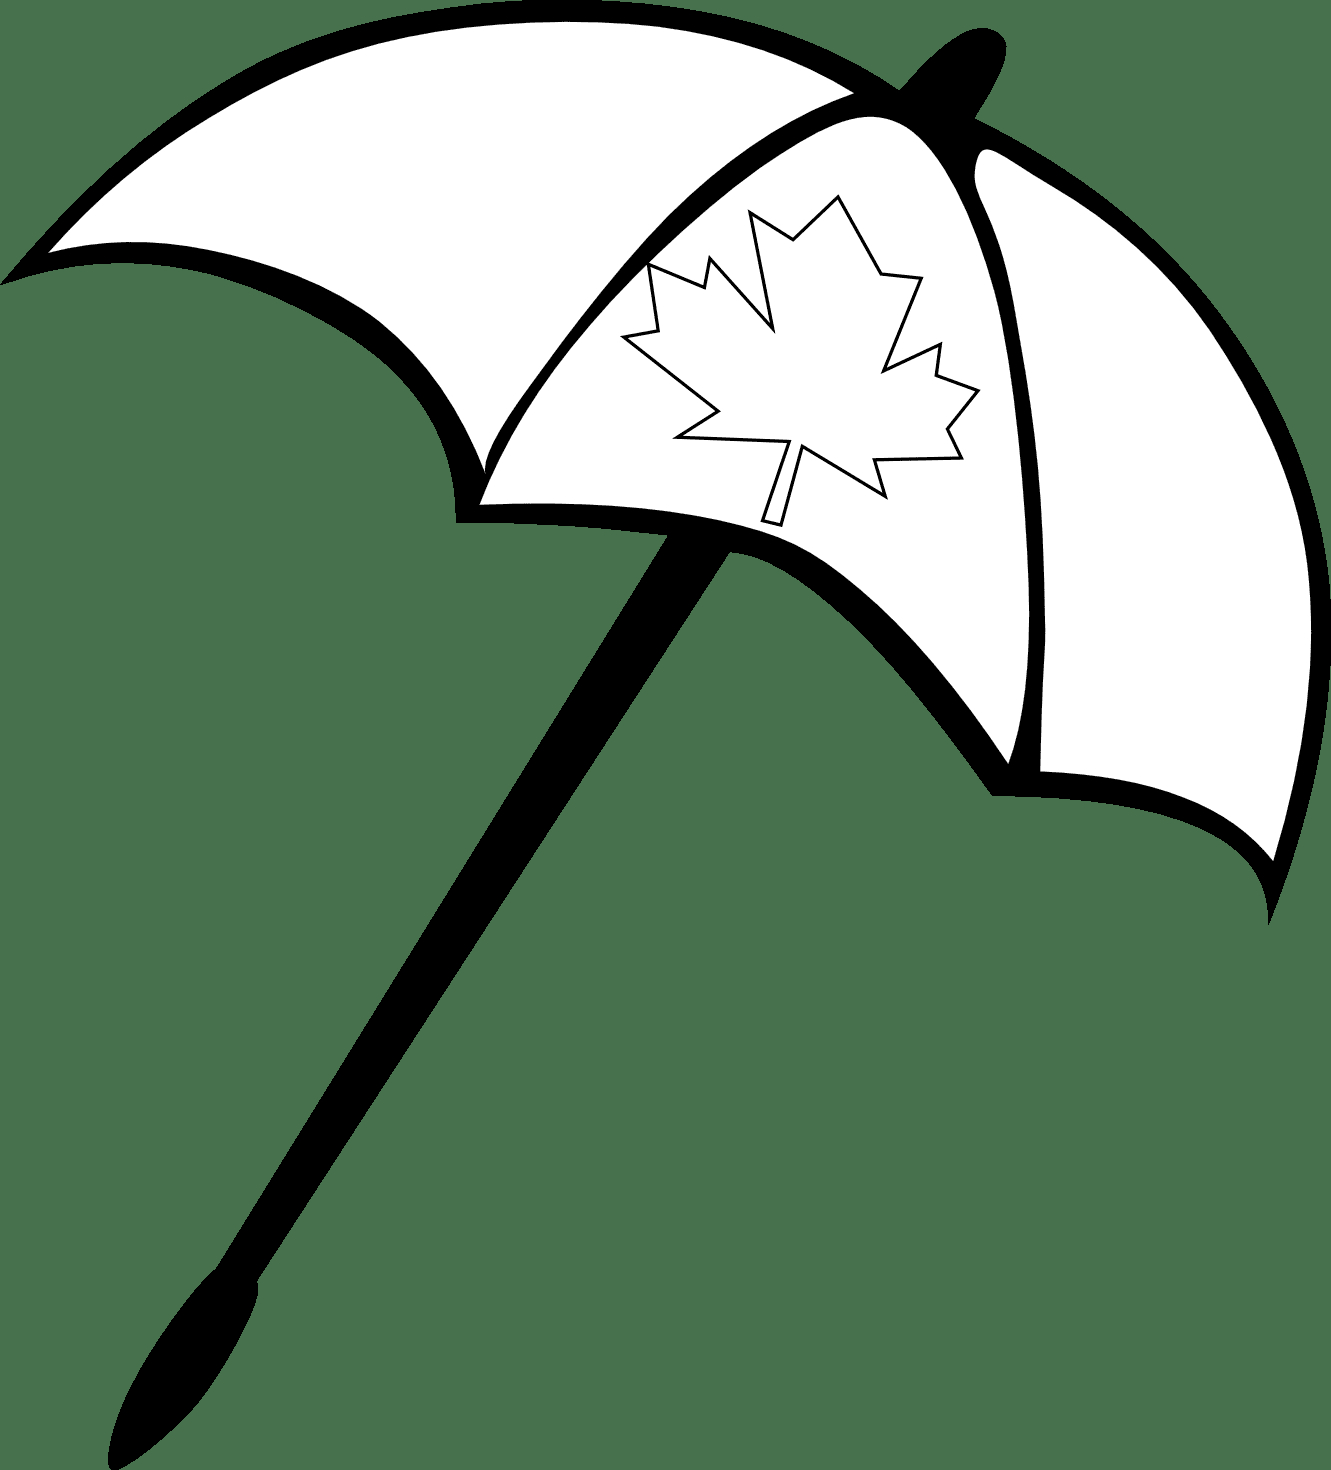 Raindrop Coloring Pages Umbrella And Raindrops Coloring Page Girl Bird Academy Simple Of An